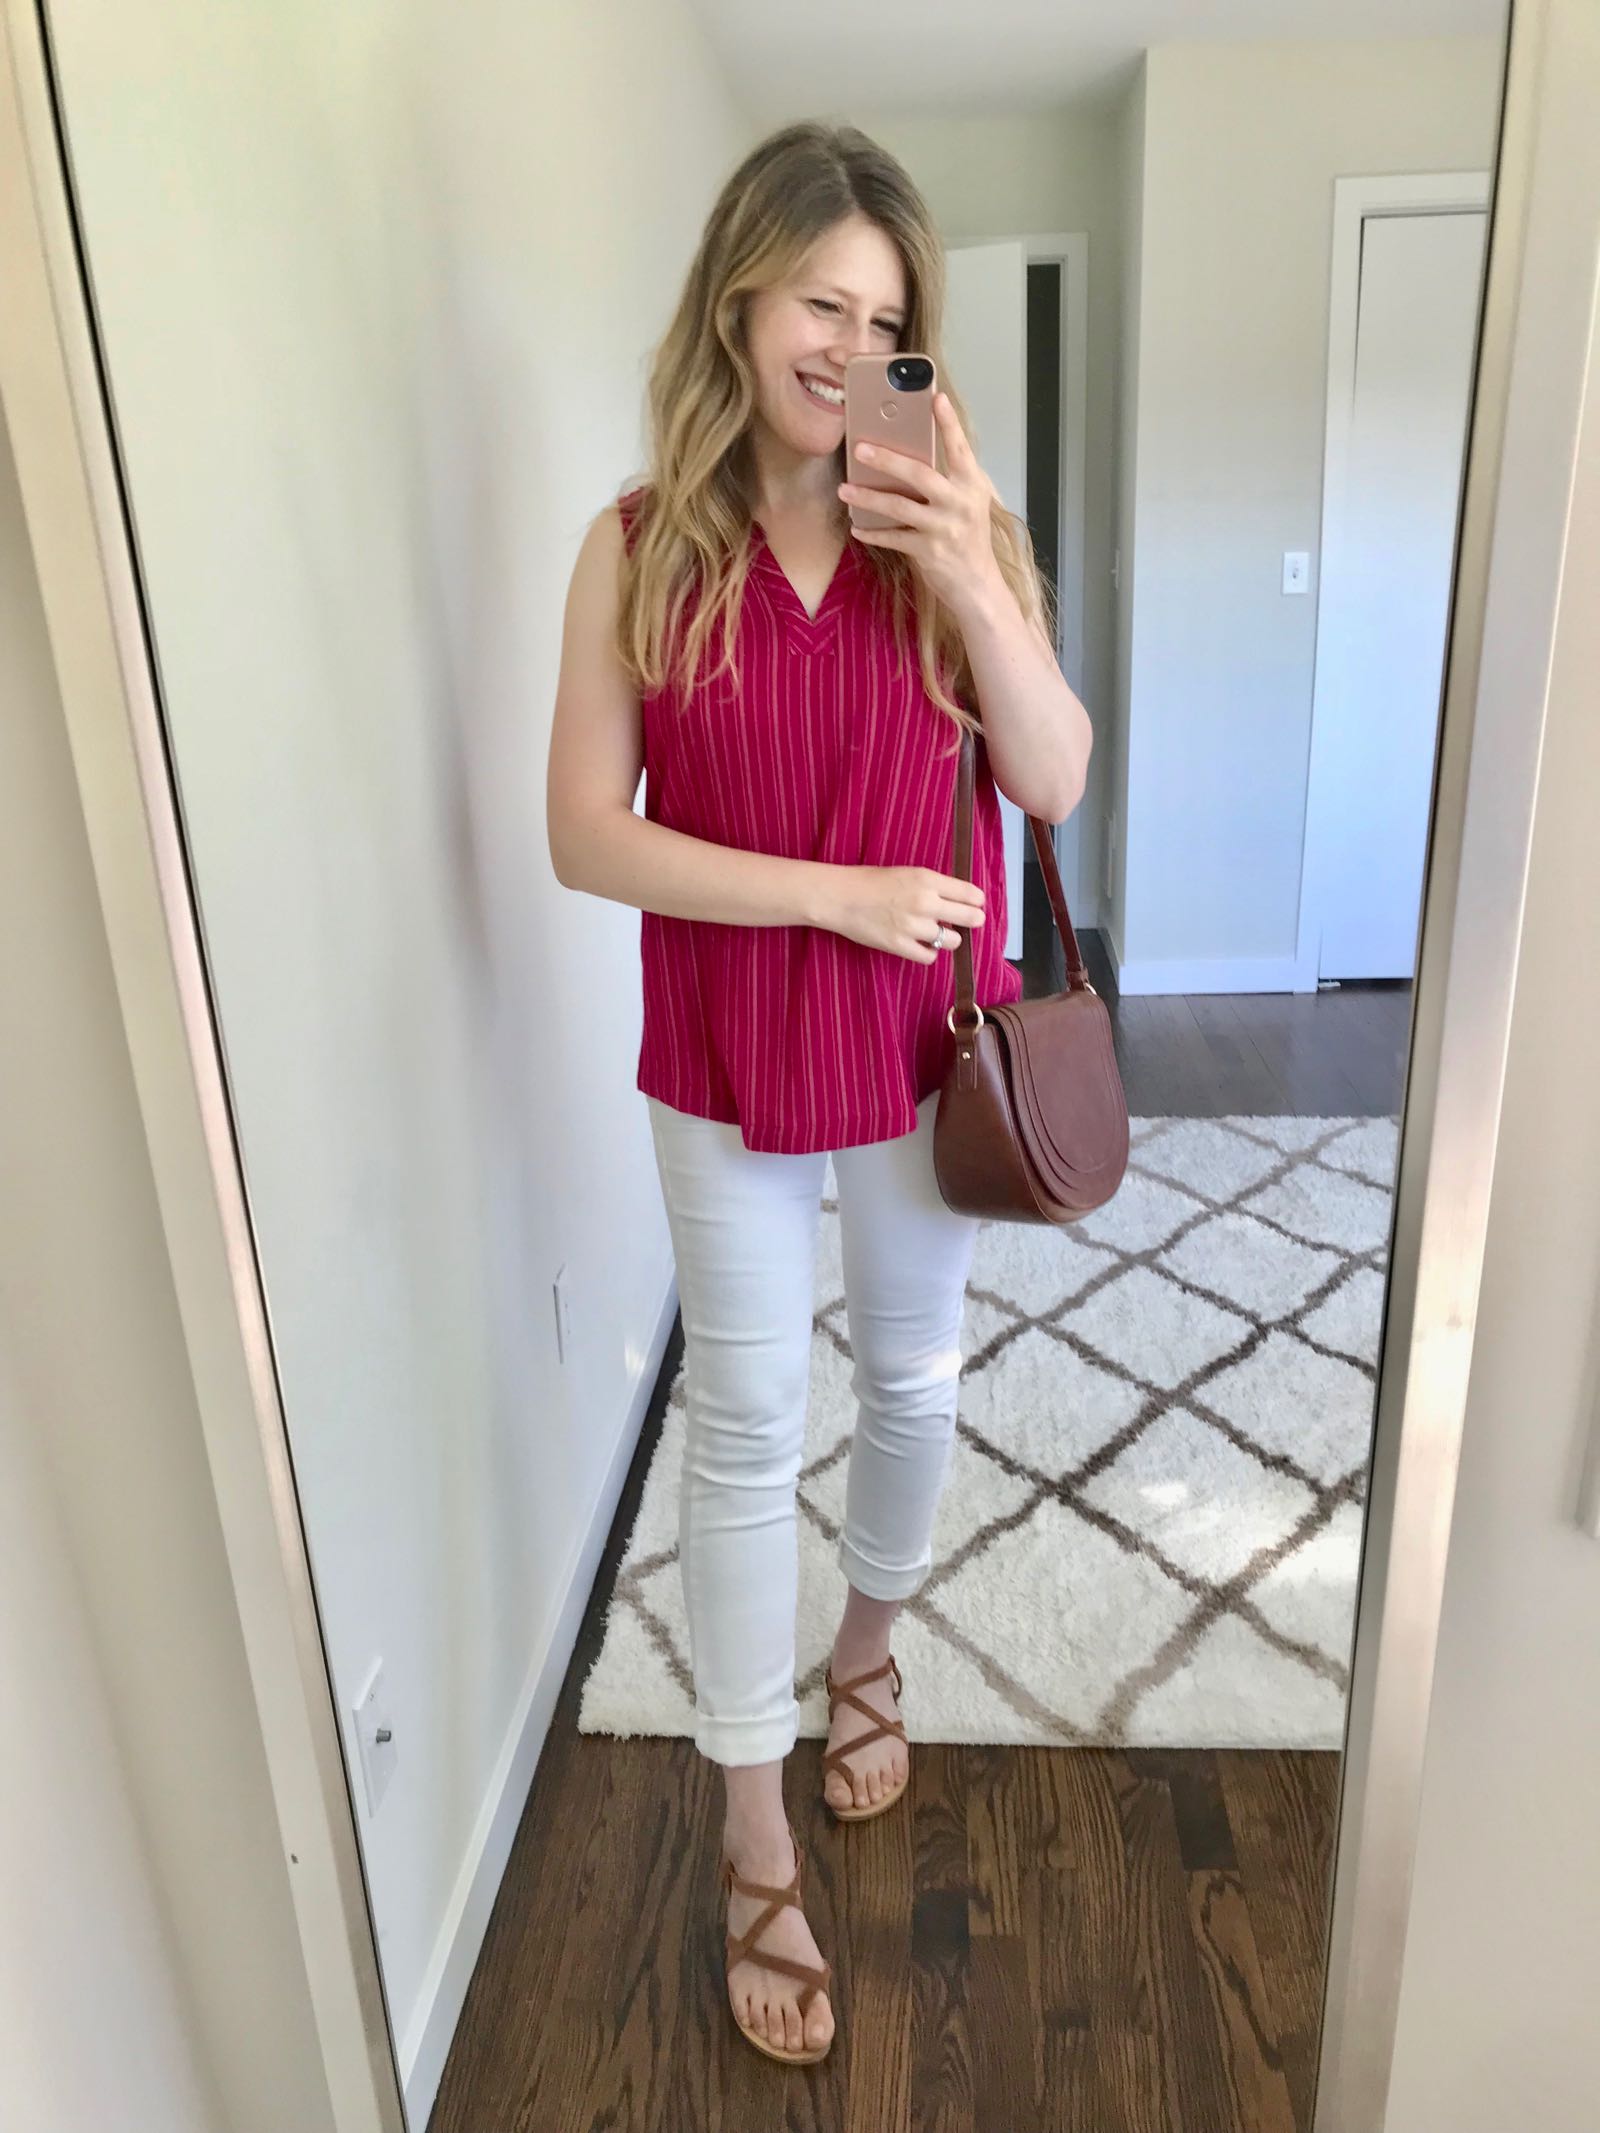 Kohl's summer higlights include this pretty pint top under $15 and white jeans under $20!